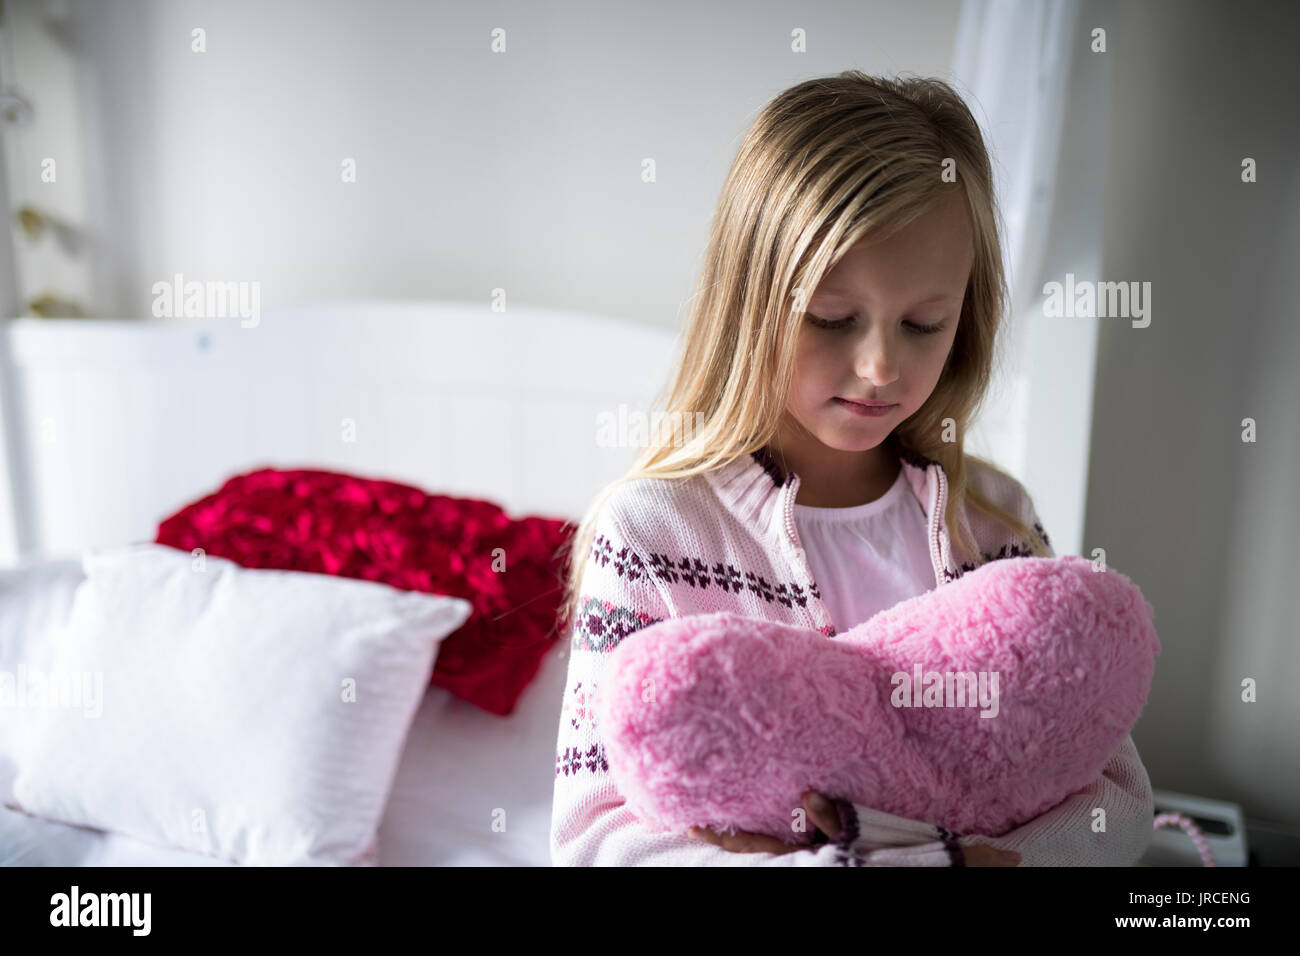 Young Woman Sitting In Bed With Heart Shaped Cushion High-Res Stock Photo -  Getty Images